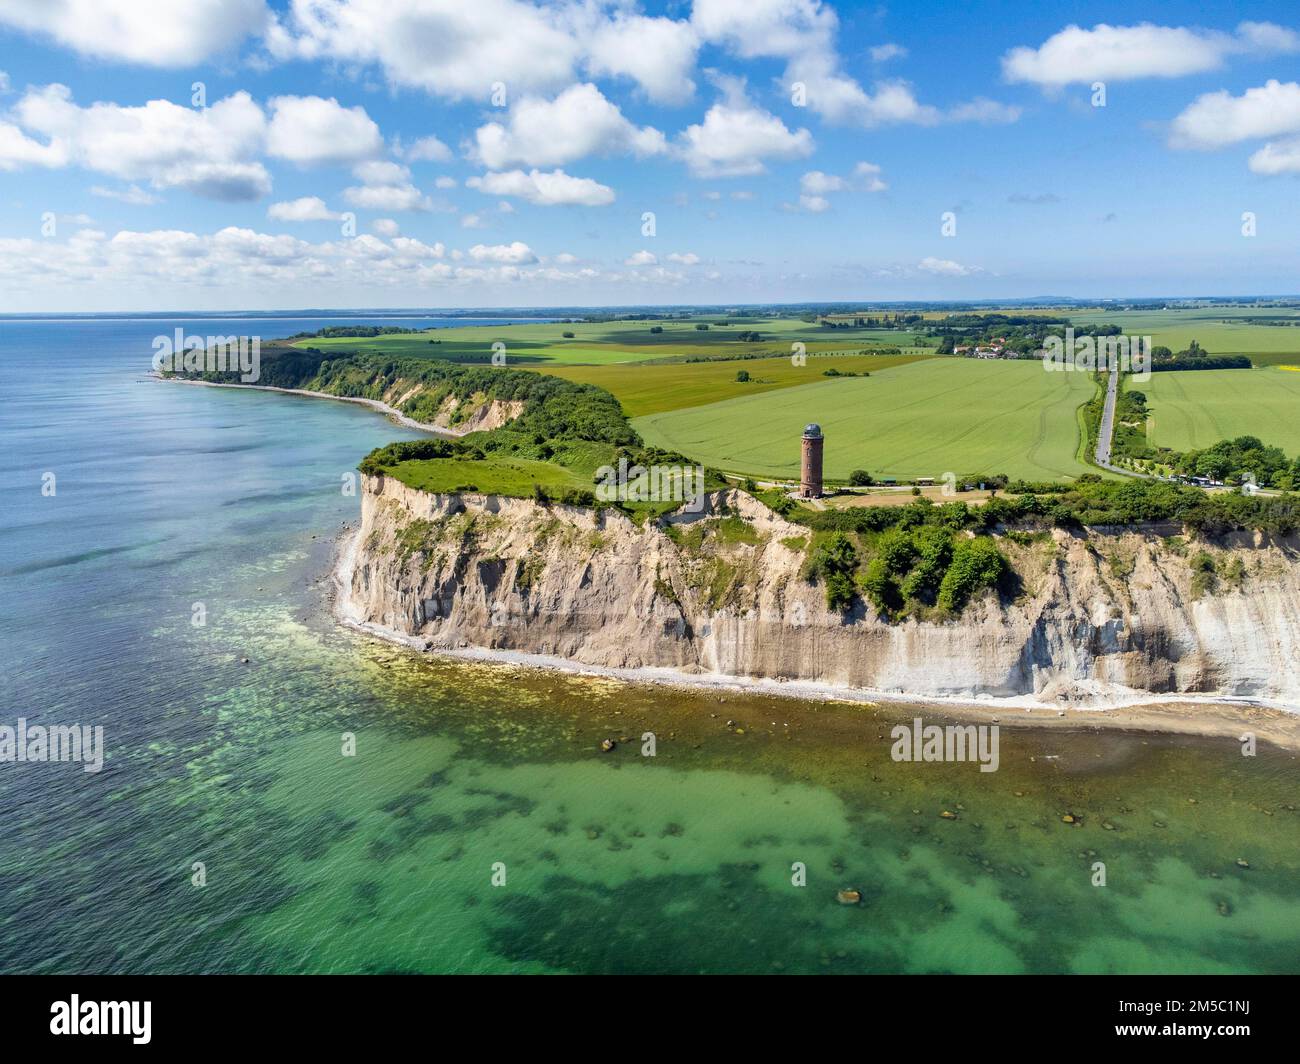 Aerial view of Cape Arkona with chalk cliffs and bearing tower, Putgarten, Ruegen Island, Mecklenburg-Western Pomerania, Germany Stock Photo